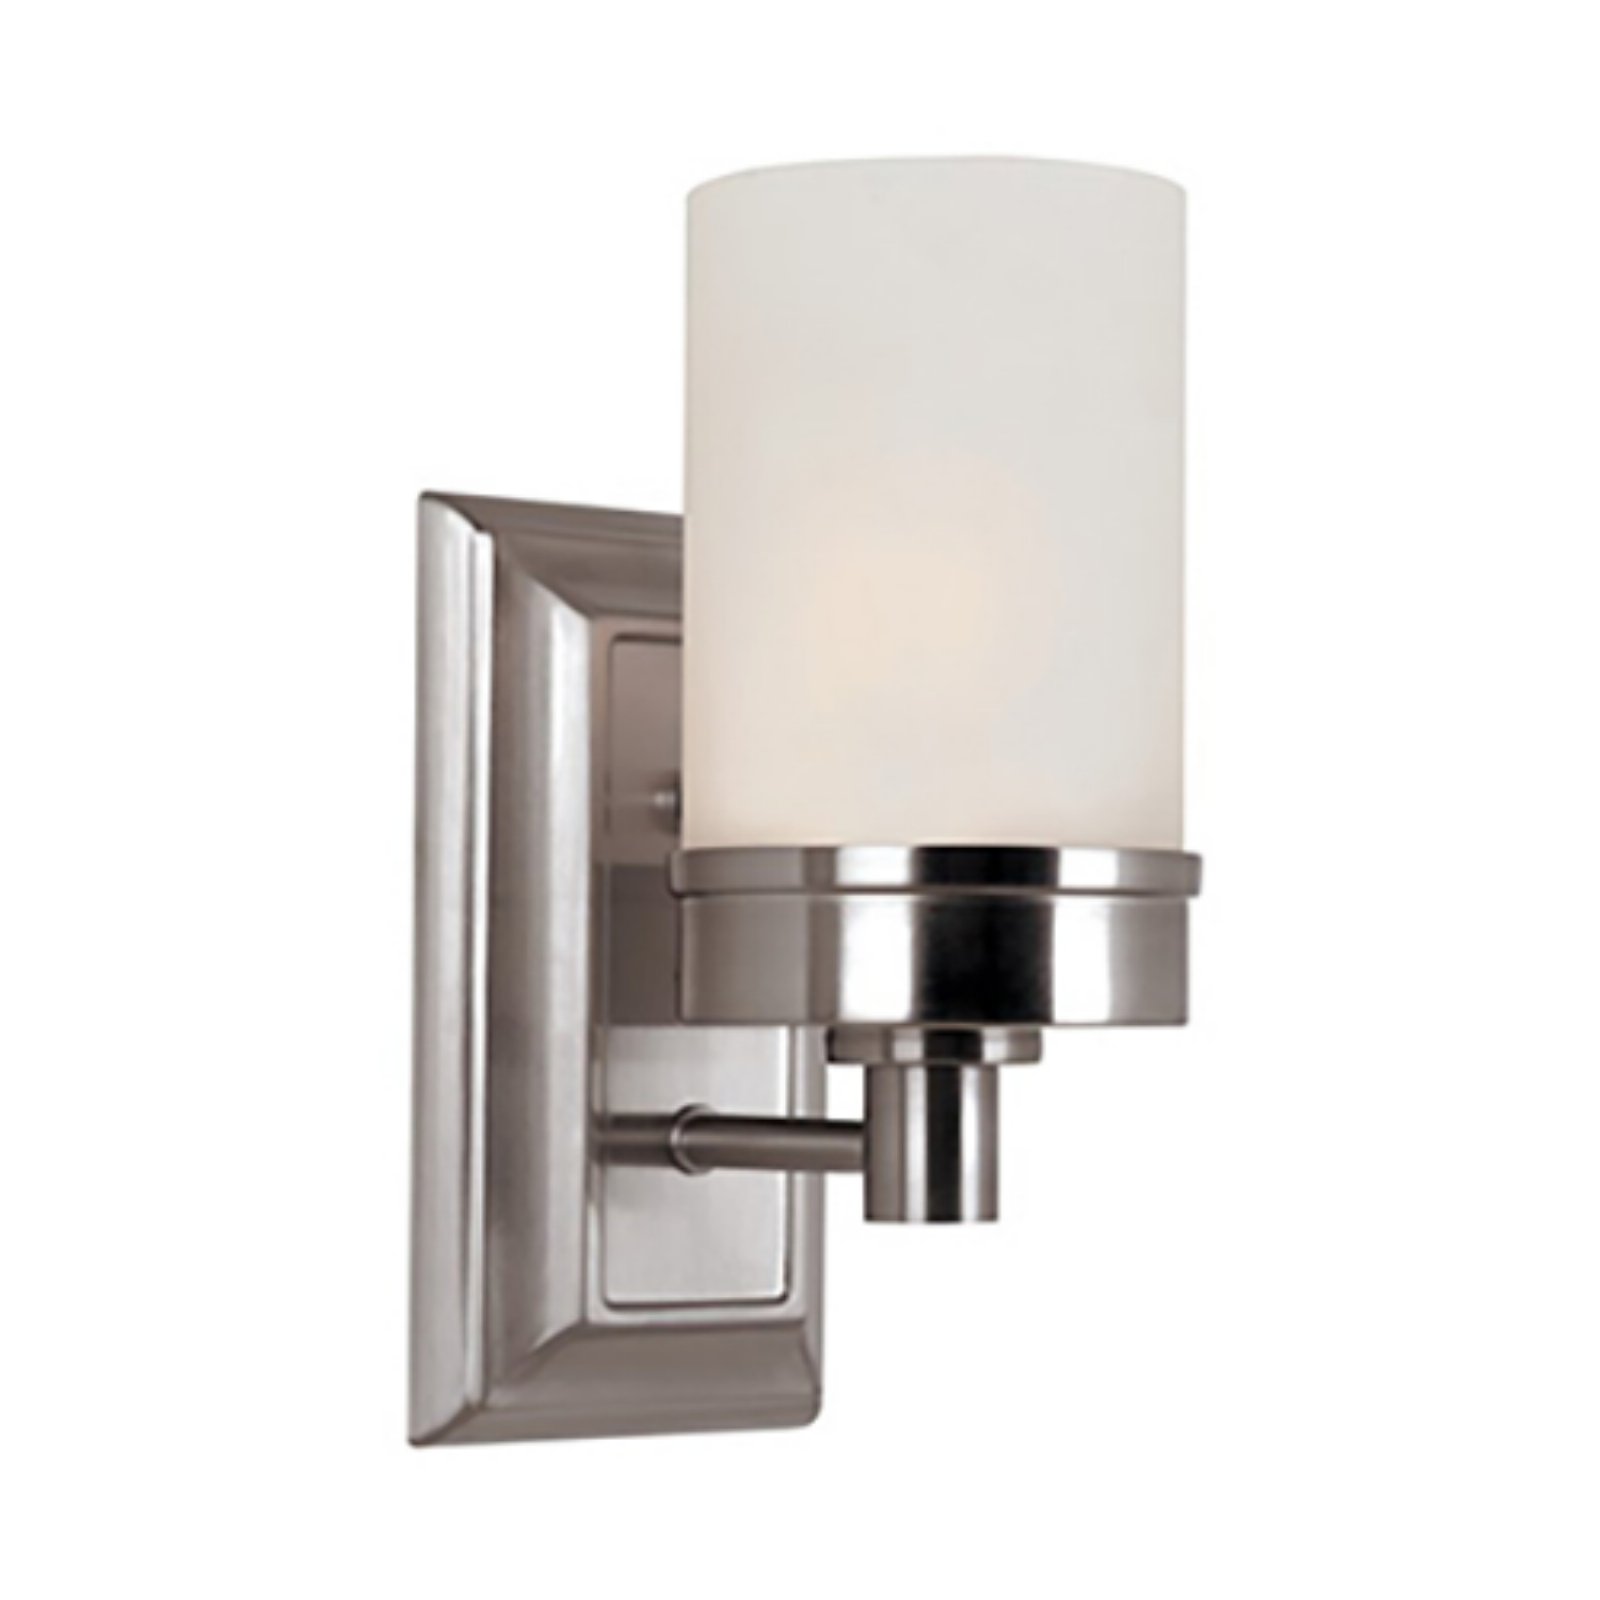 Trans Globe Lighting - Urban Swag - One Light Wall Sconce - image 1 of 2